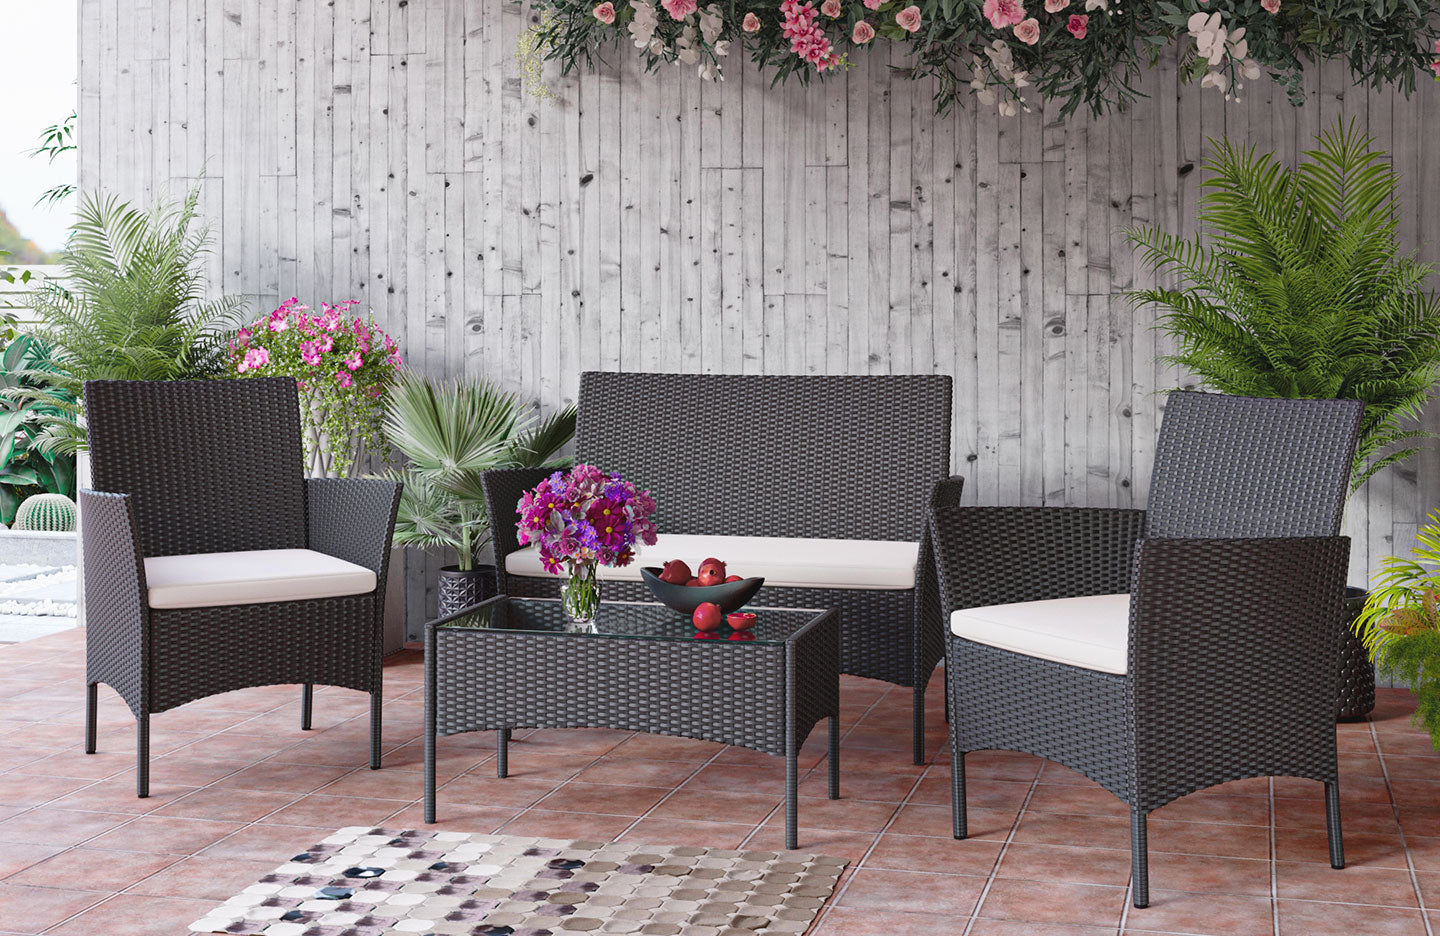 4-Seater Rattan Garden Furniture Patio Conversation Set with 2 Single Chairs, 1 Double Sofa and 1 Table